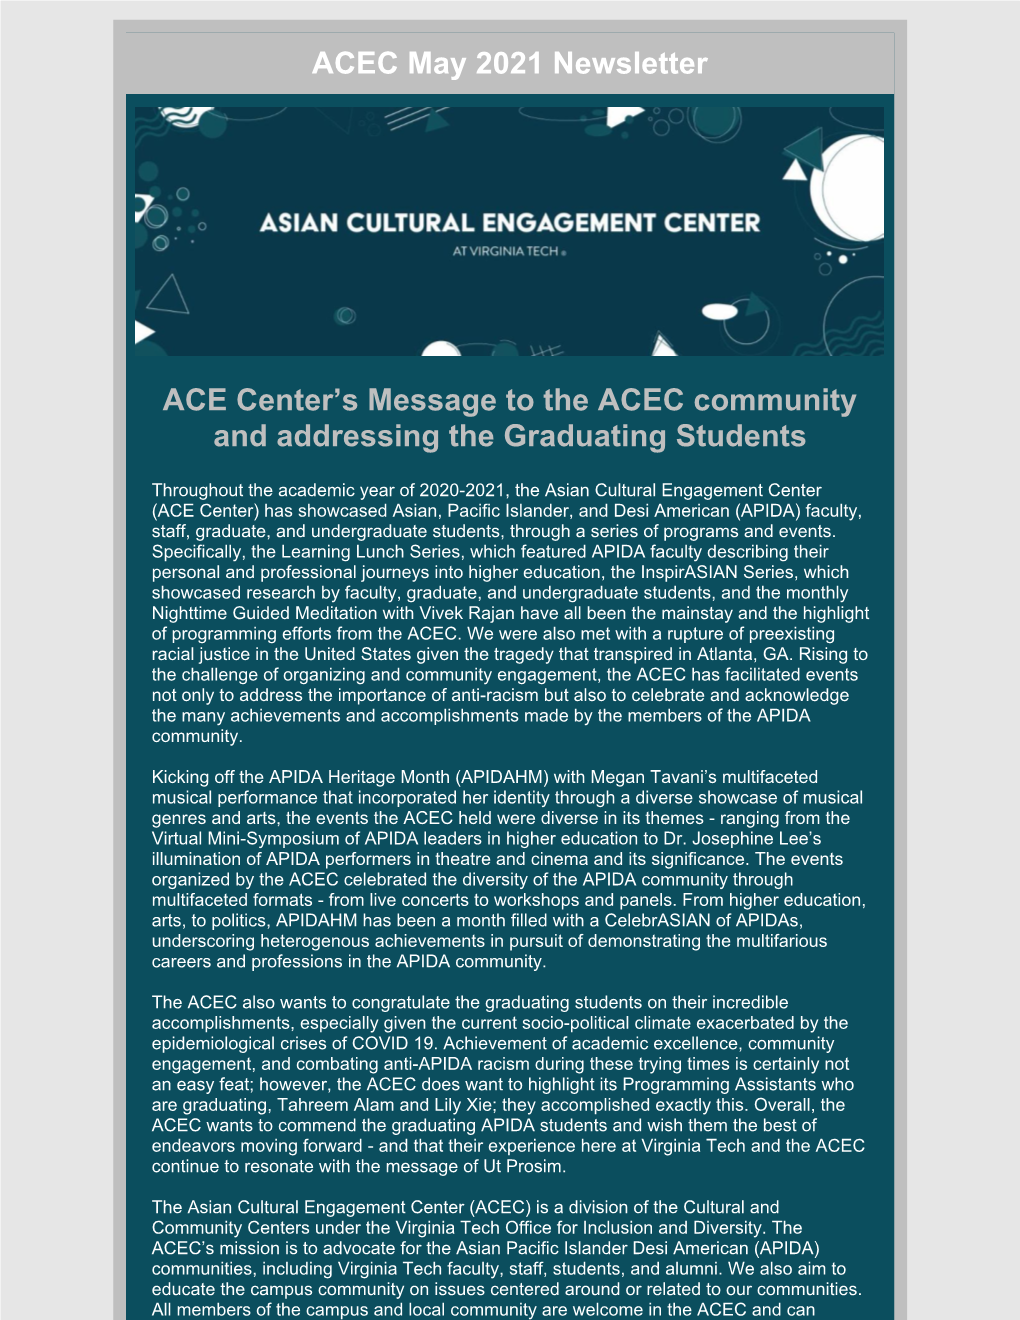 ACEC May 2021 Newsletter ACE Center's Message to the ACEC Community and Addressing the Graduating Students